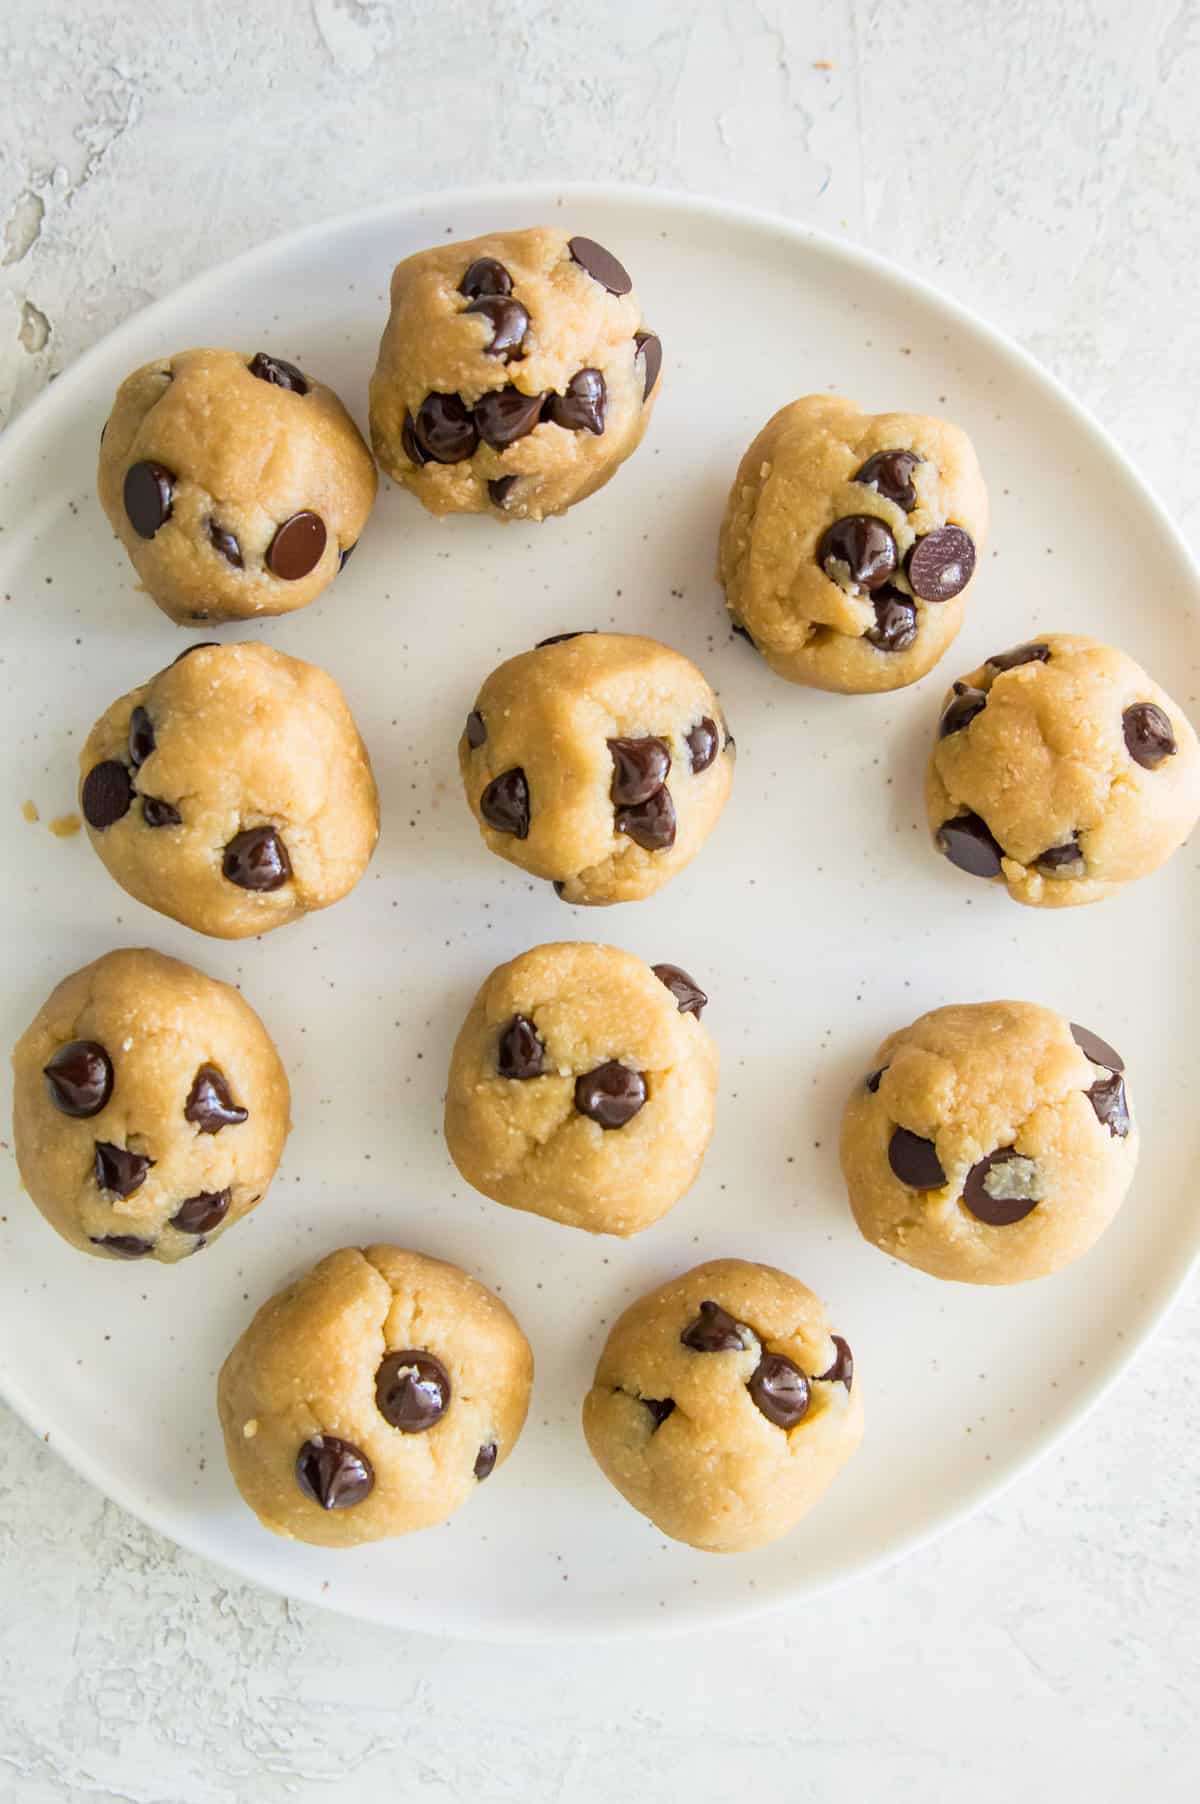 A plate with no bake chocolate chip cookie dough bites on it.